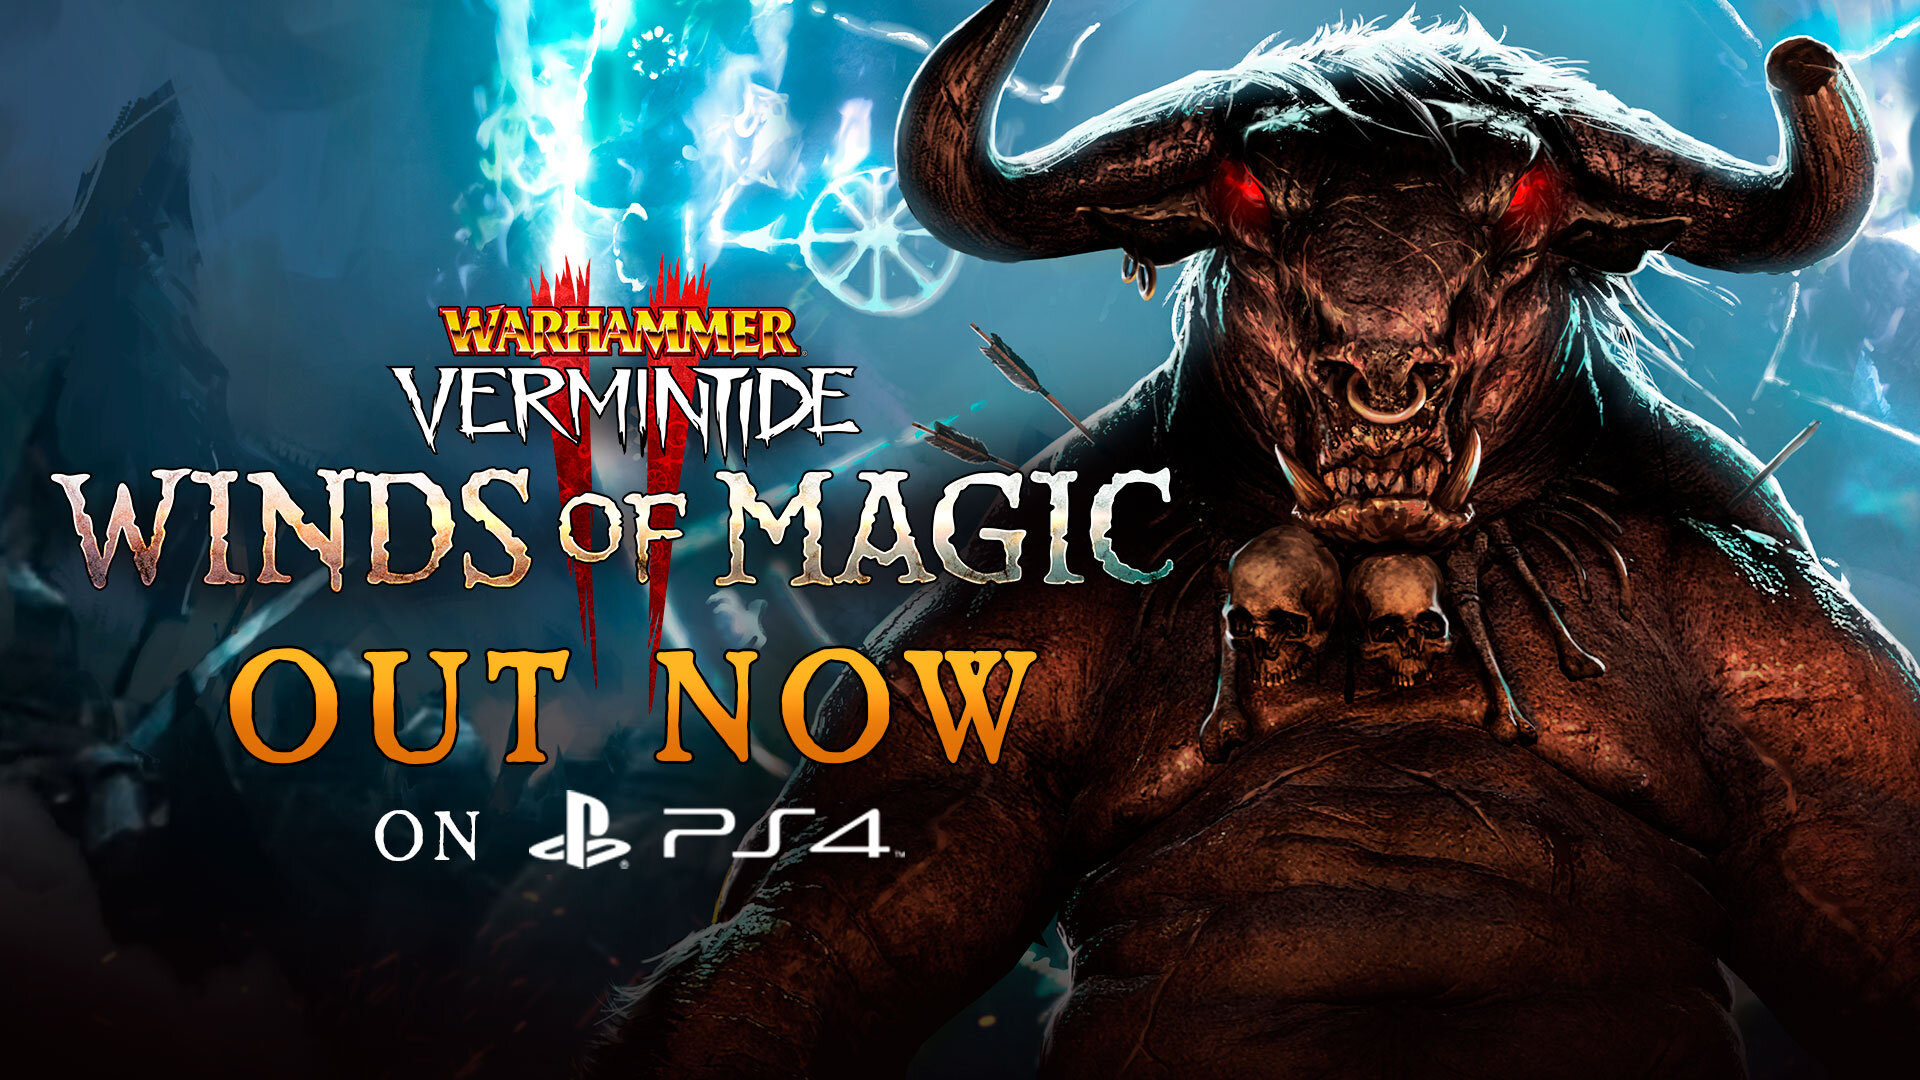 Winds of Magic out now on PlayStation 4! — Warhammer: Vermintide 2